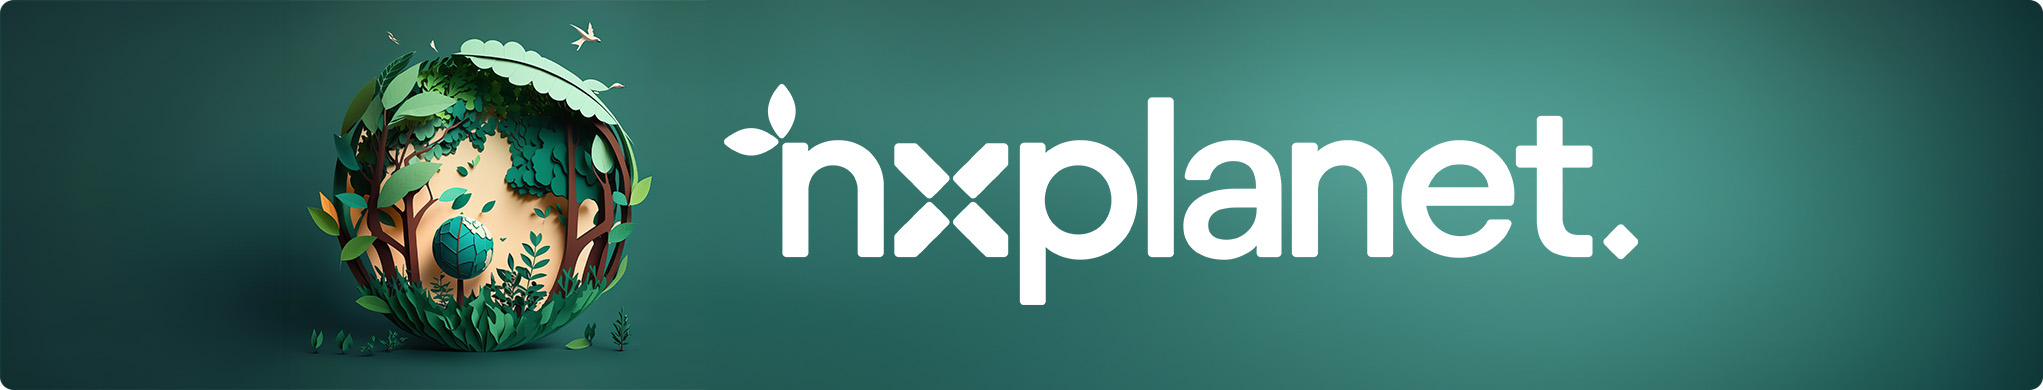 nxplanet. Sustainable choices